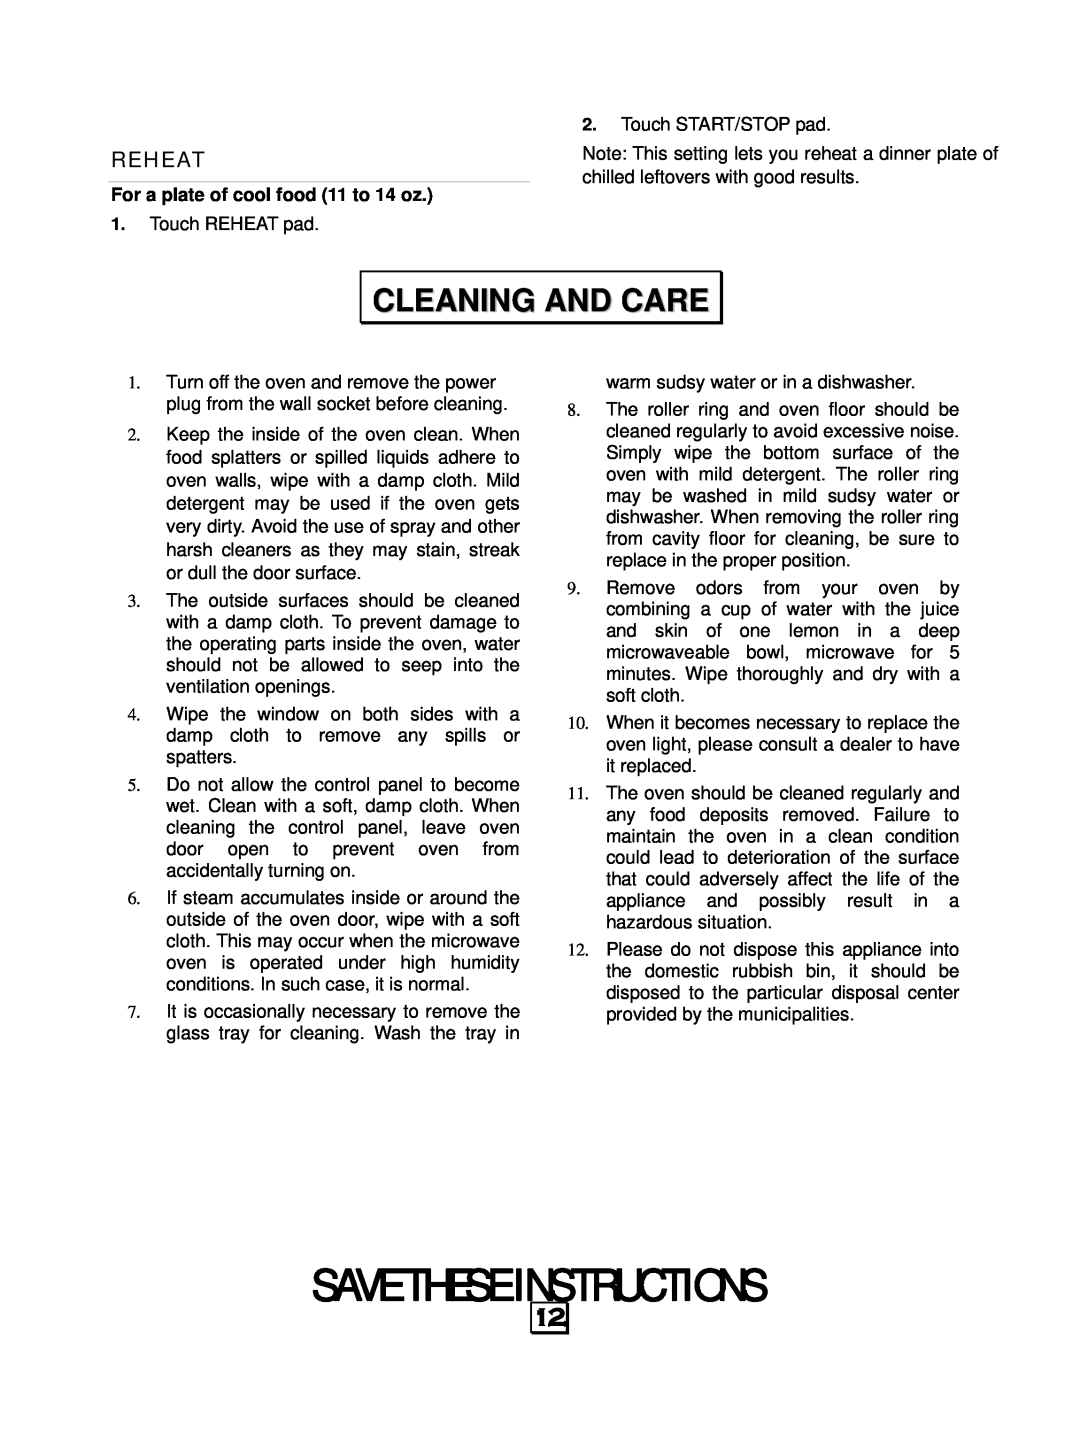 RCA RMW1156 owner manual Cleaning And Care, Reheat, Save These Instructions 